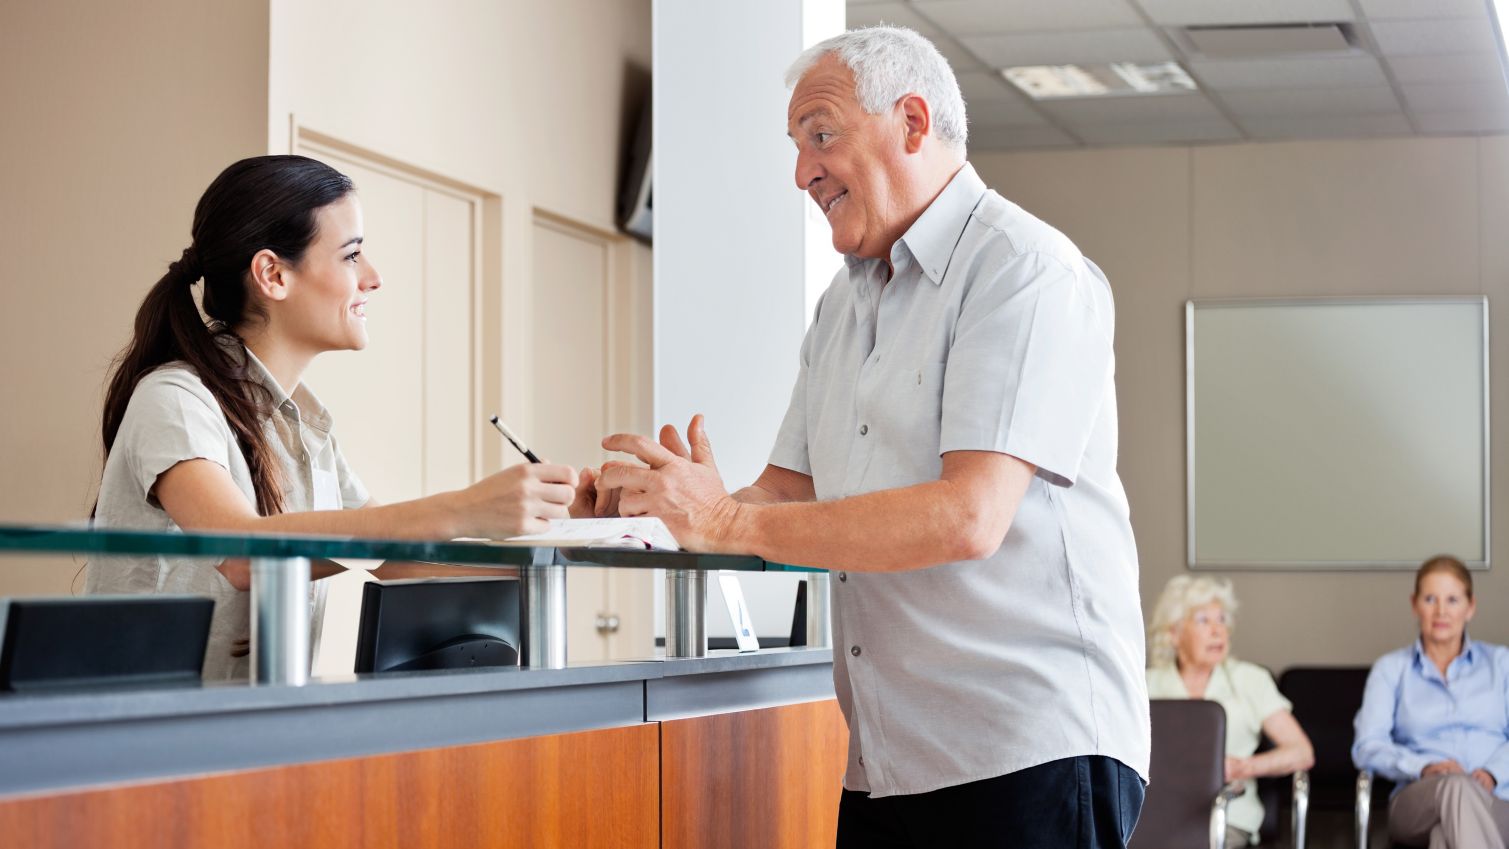 Woman hospital receptionist speaks to a male patient.